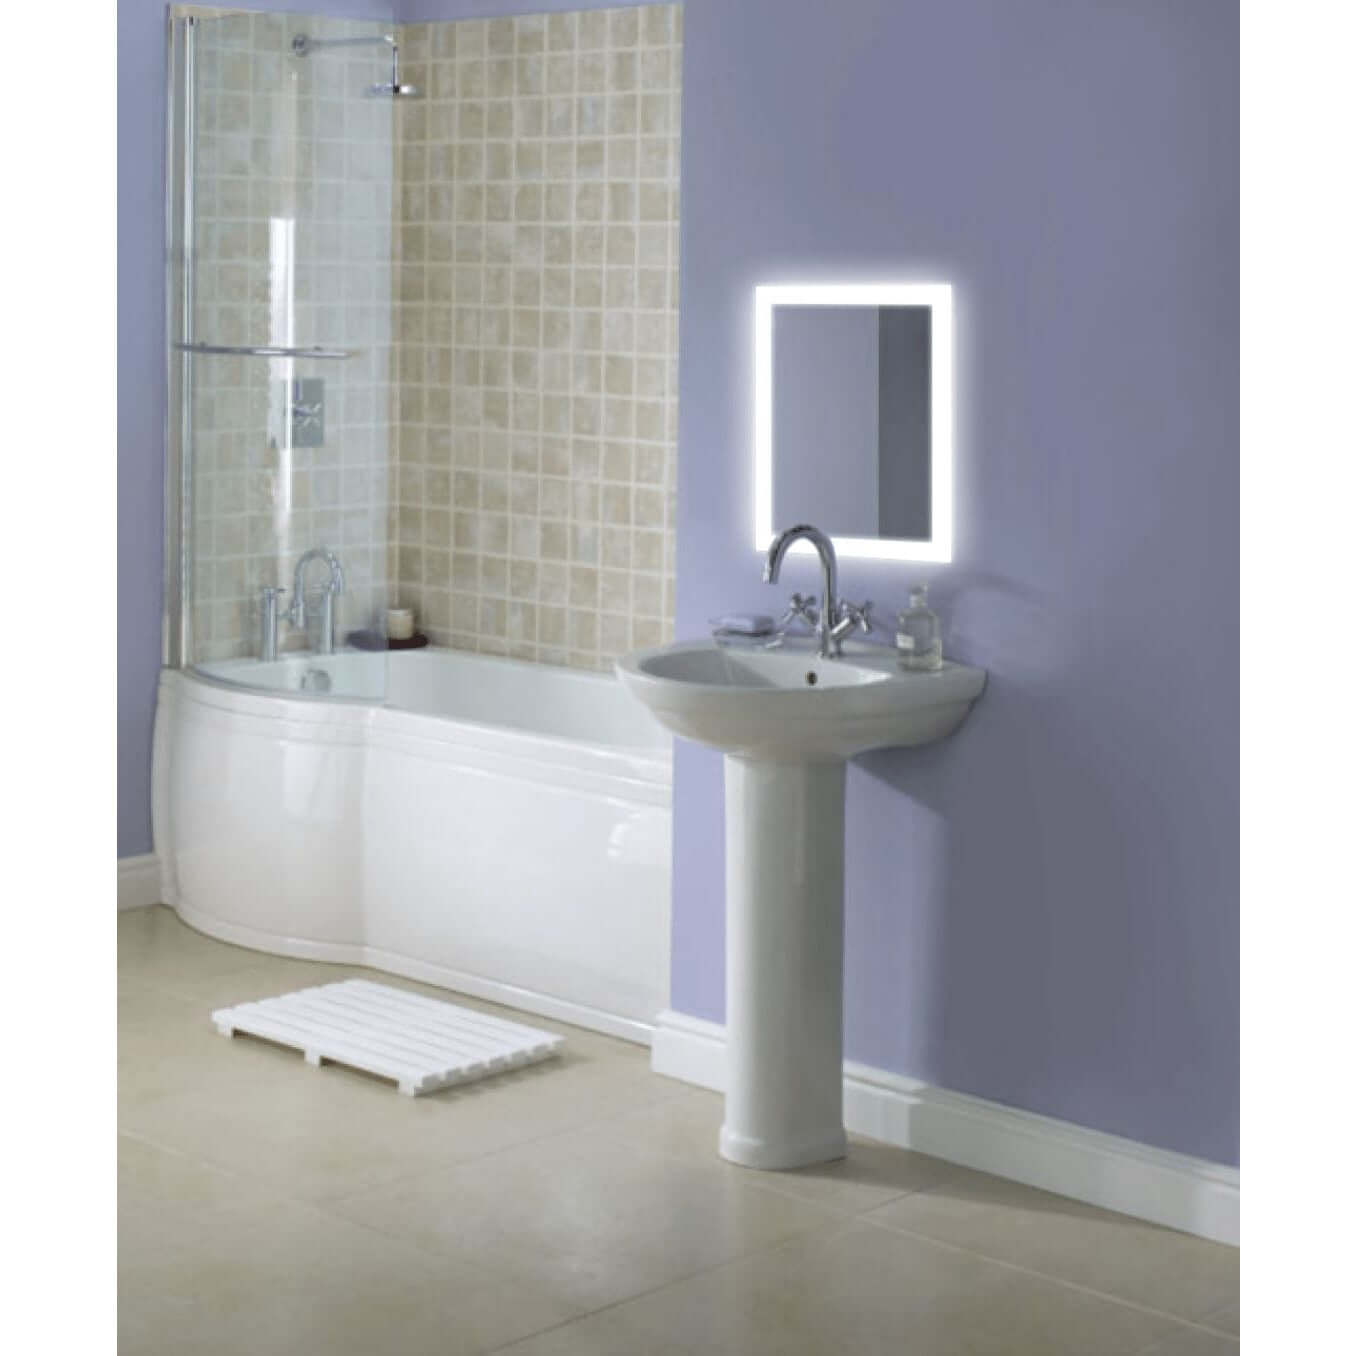 Krugg Bijou 15 X 20 LED mirror featured in a modern bathroom with white fixtures